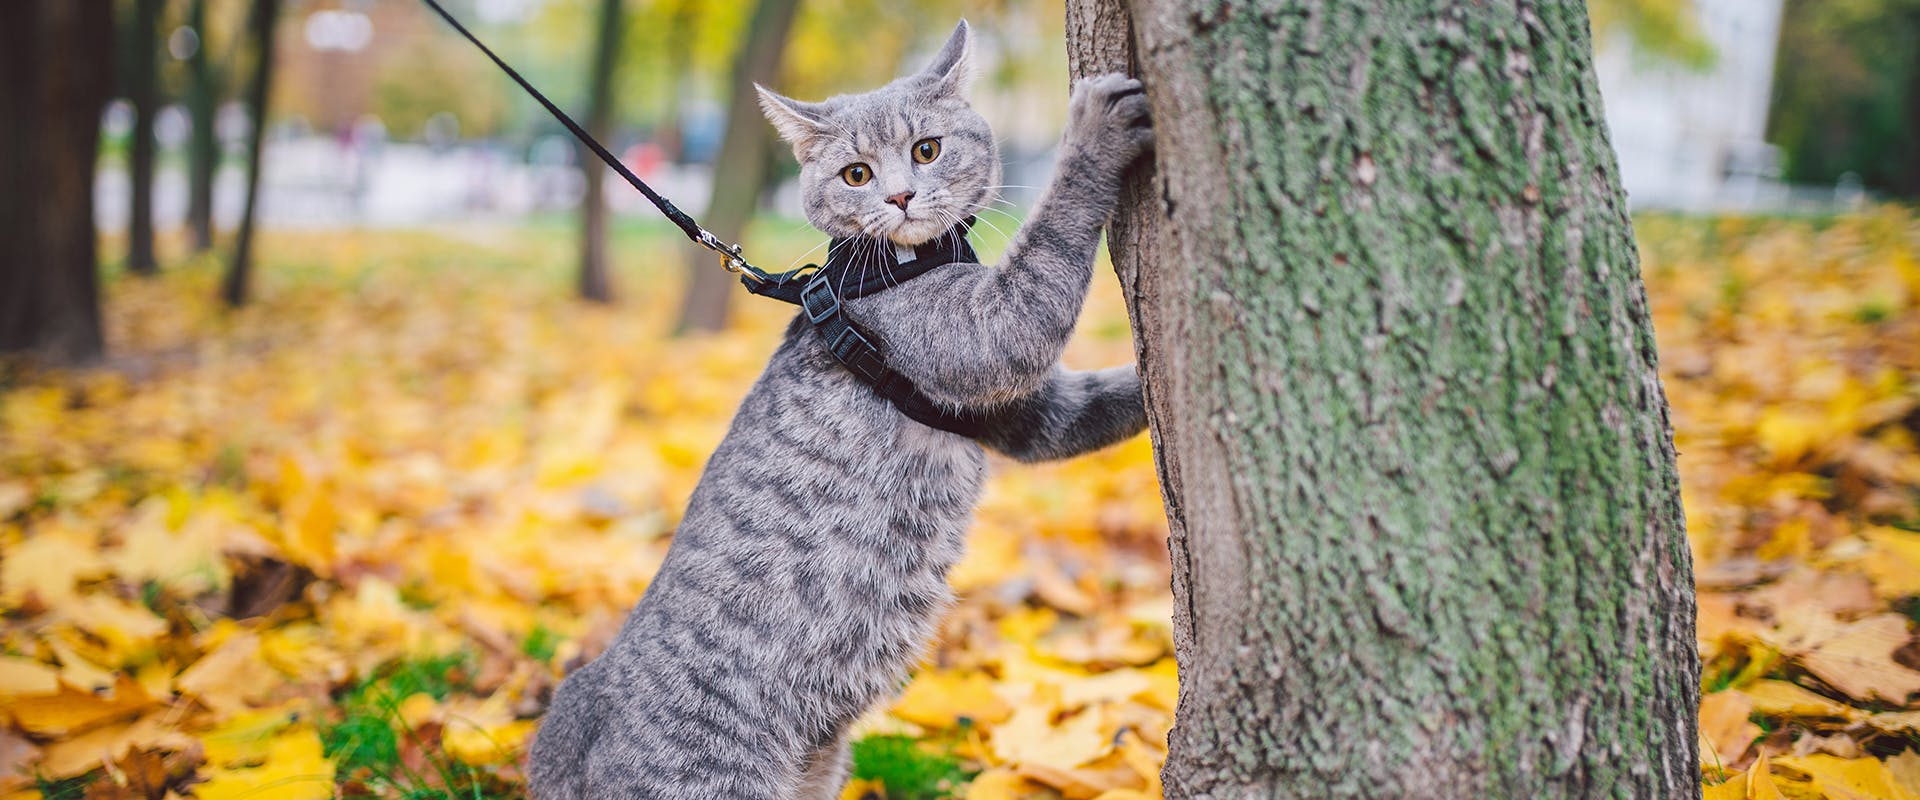 A cat wearing a black cat harness standing in a park covered in fallen leaves, its paws extended up against a tree